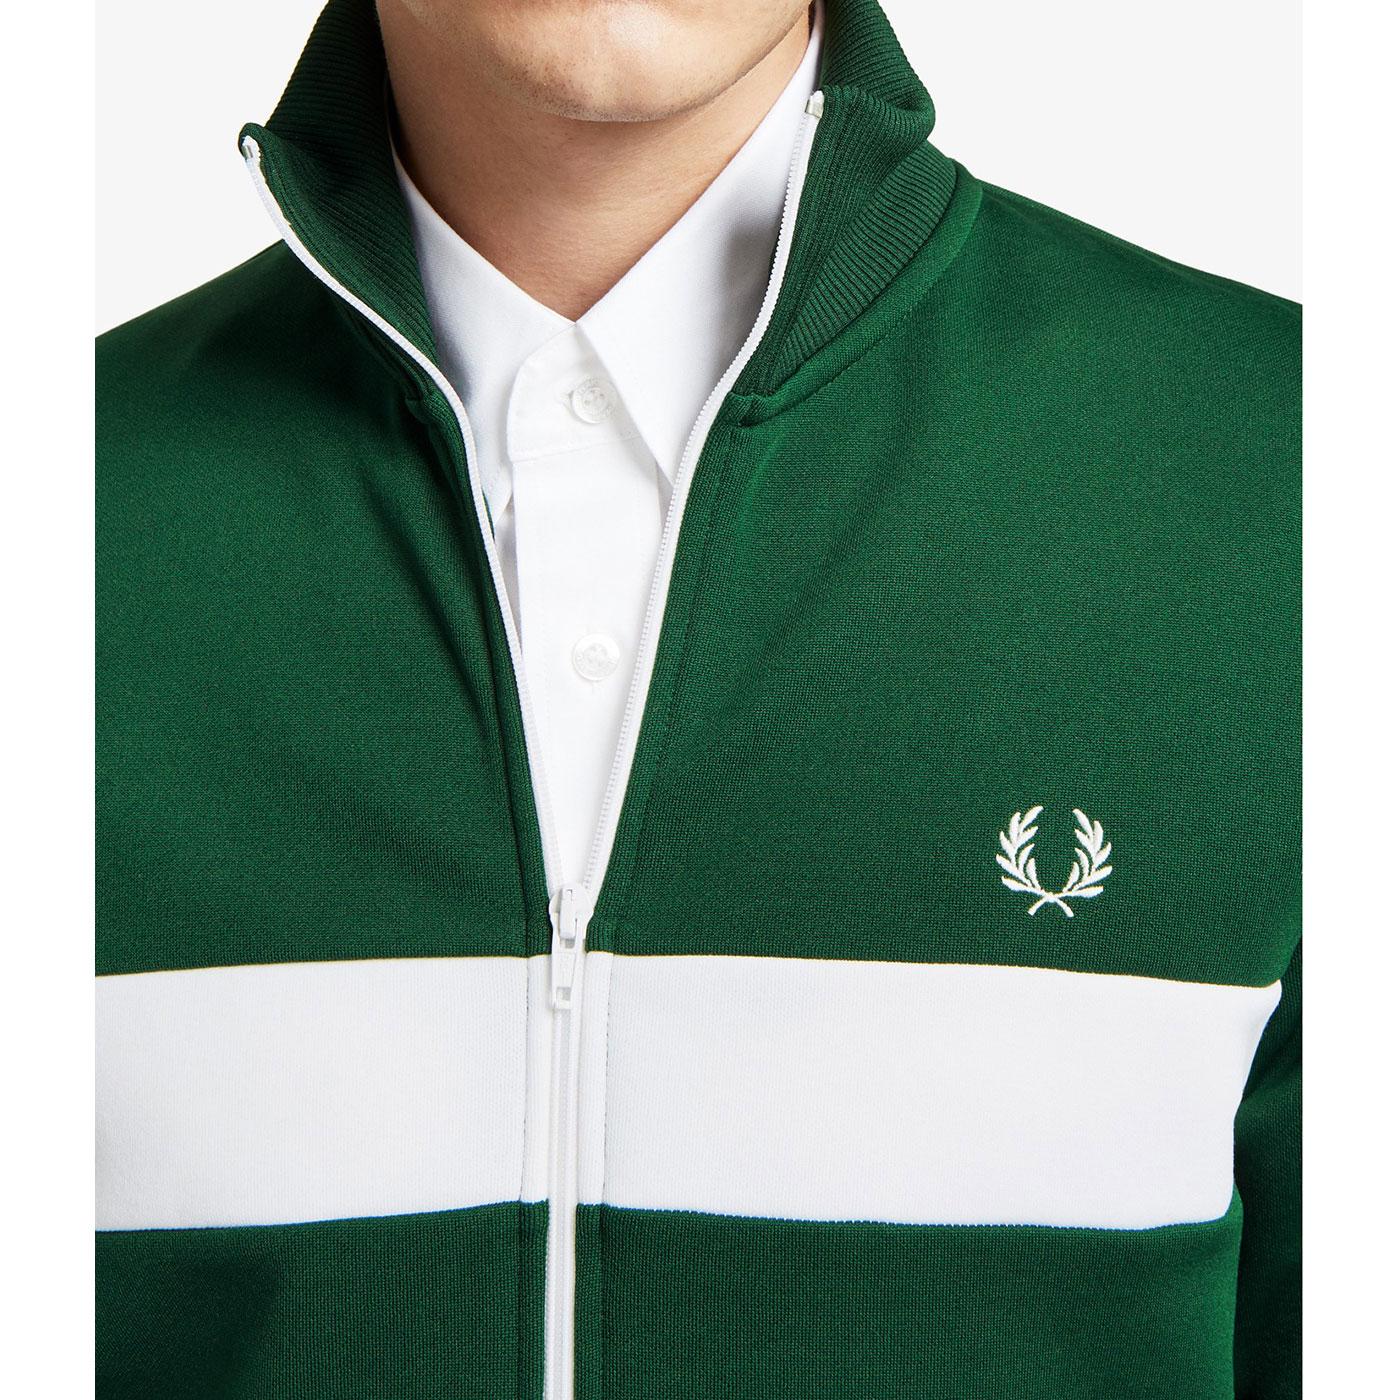 FRED PERRY Men's Retro Contrast Panel Track Jacket in Ivy